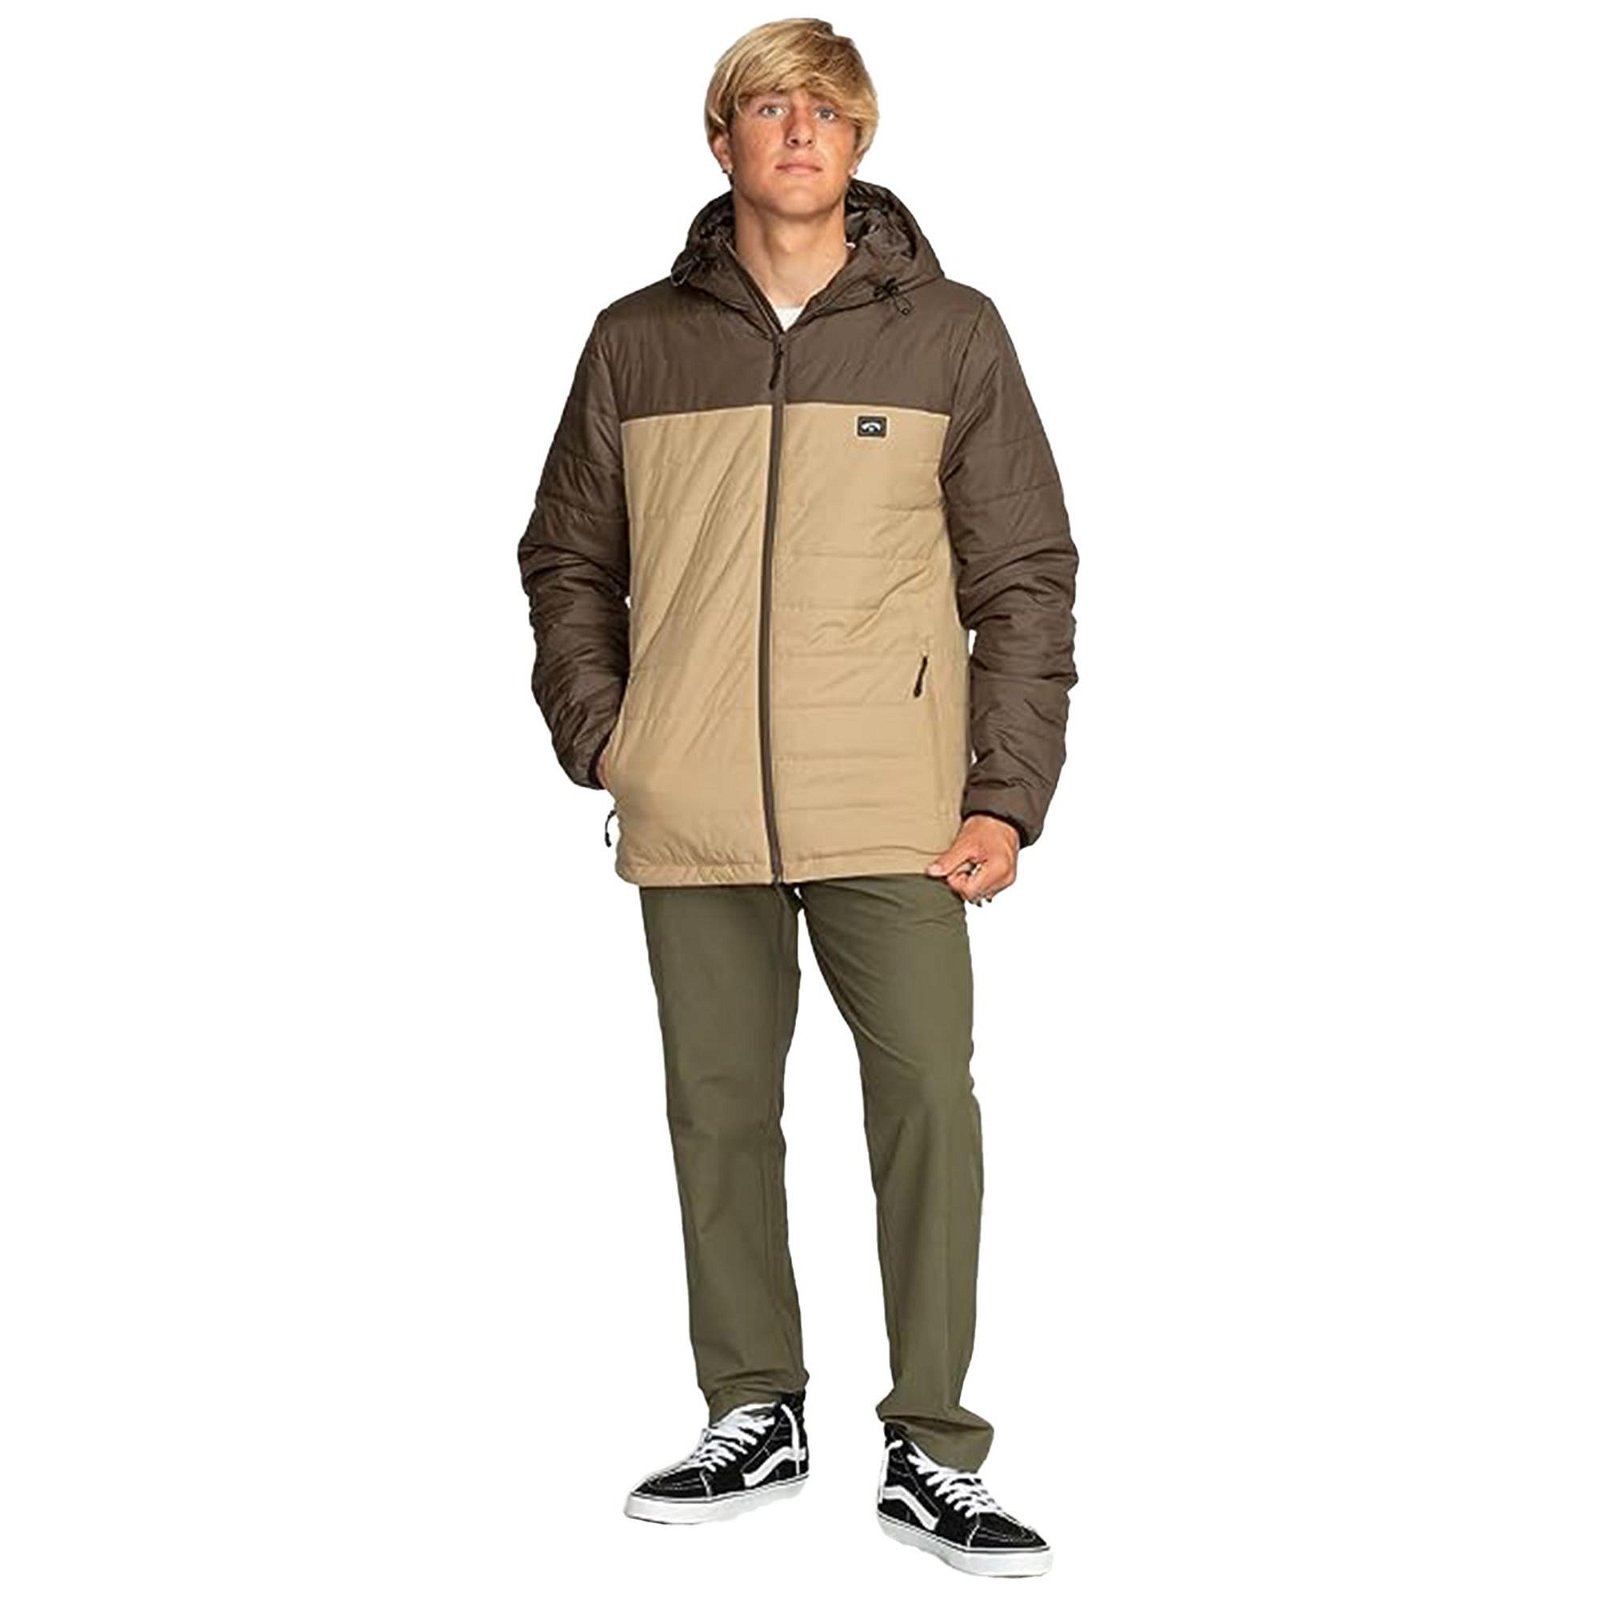 SURF CHECK PUFFER